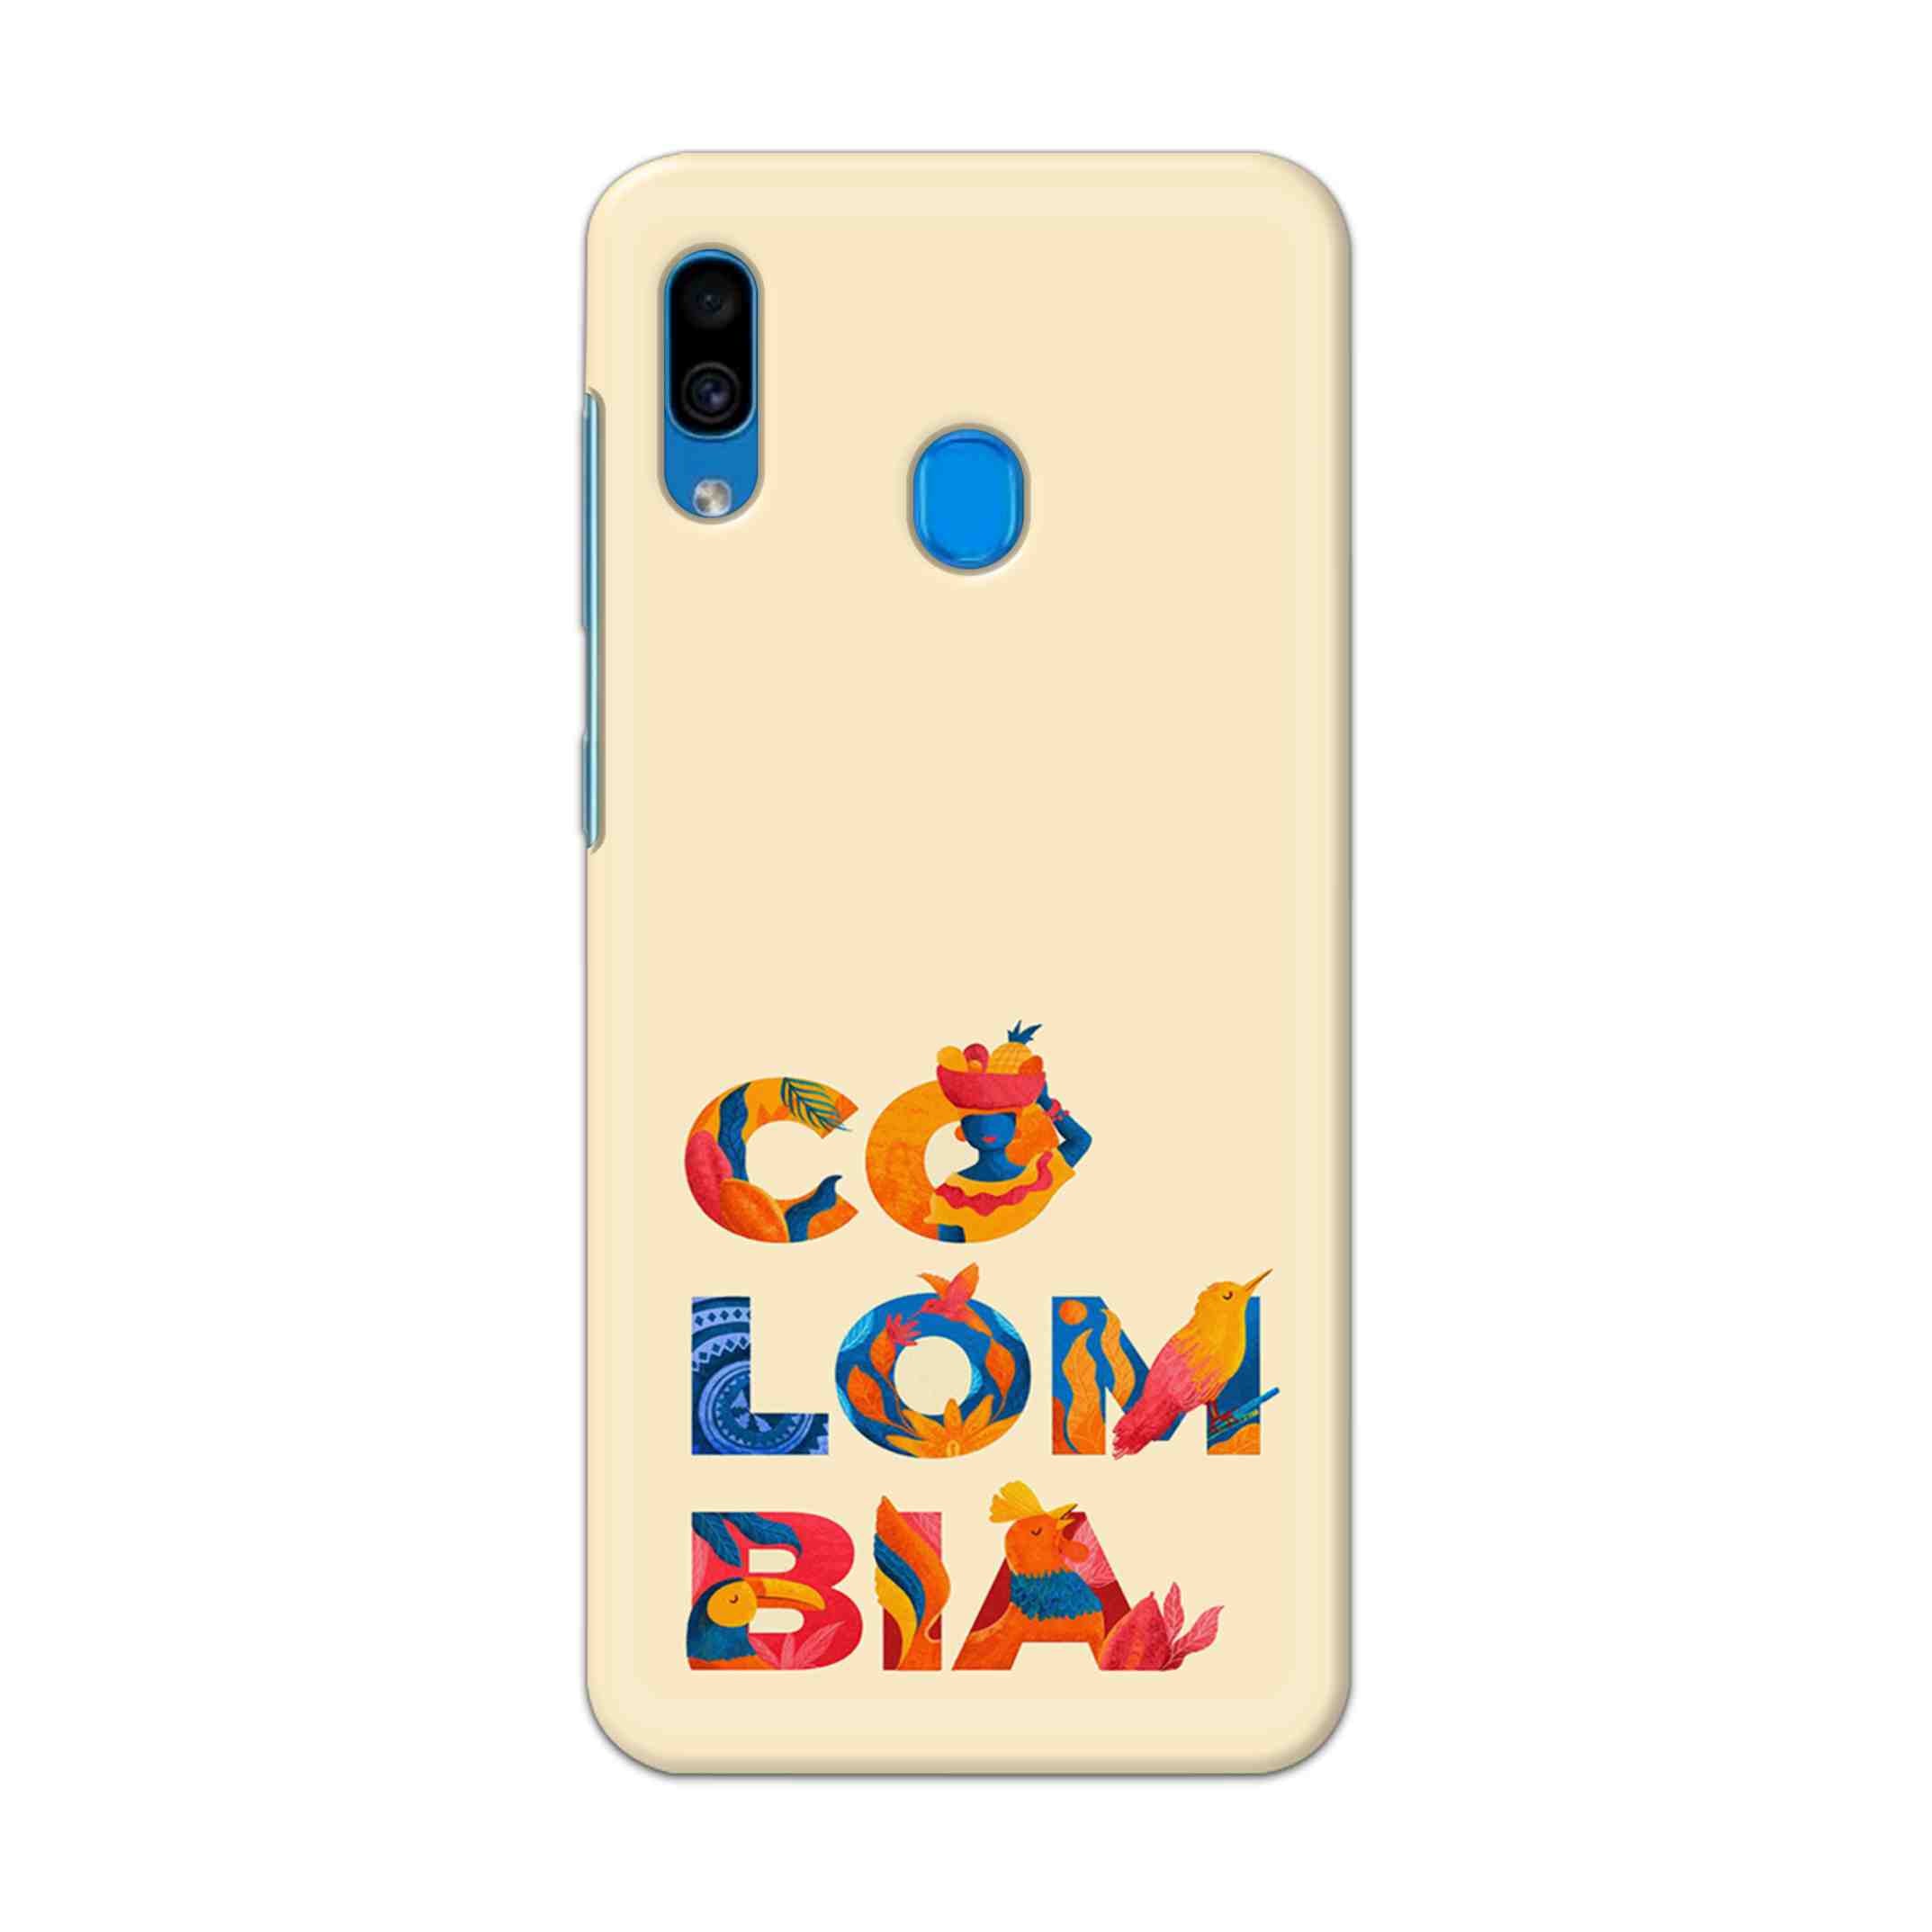 Buy Colombia Hard Back Mobile Phone Case Cover For Samsung Galaxy A30 Online